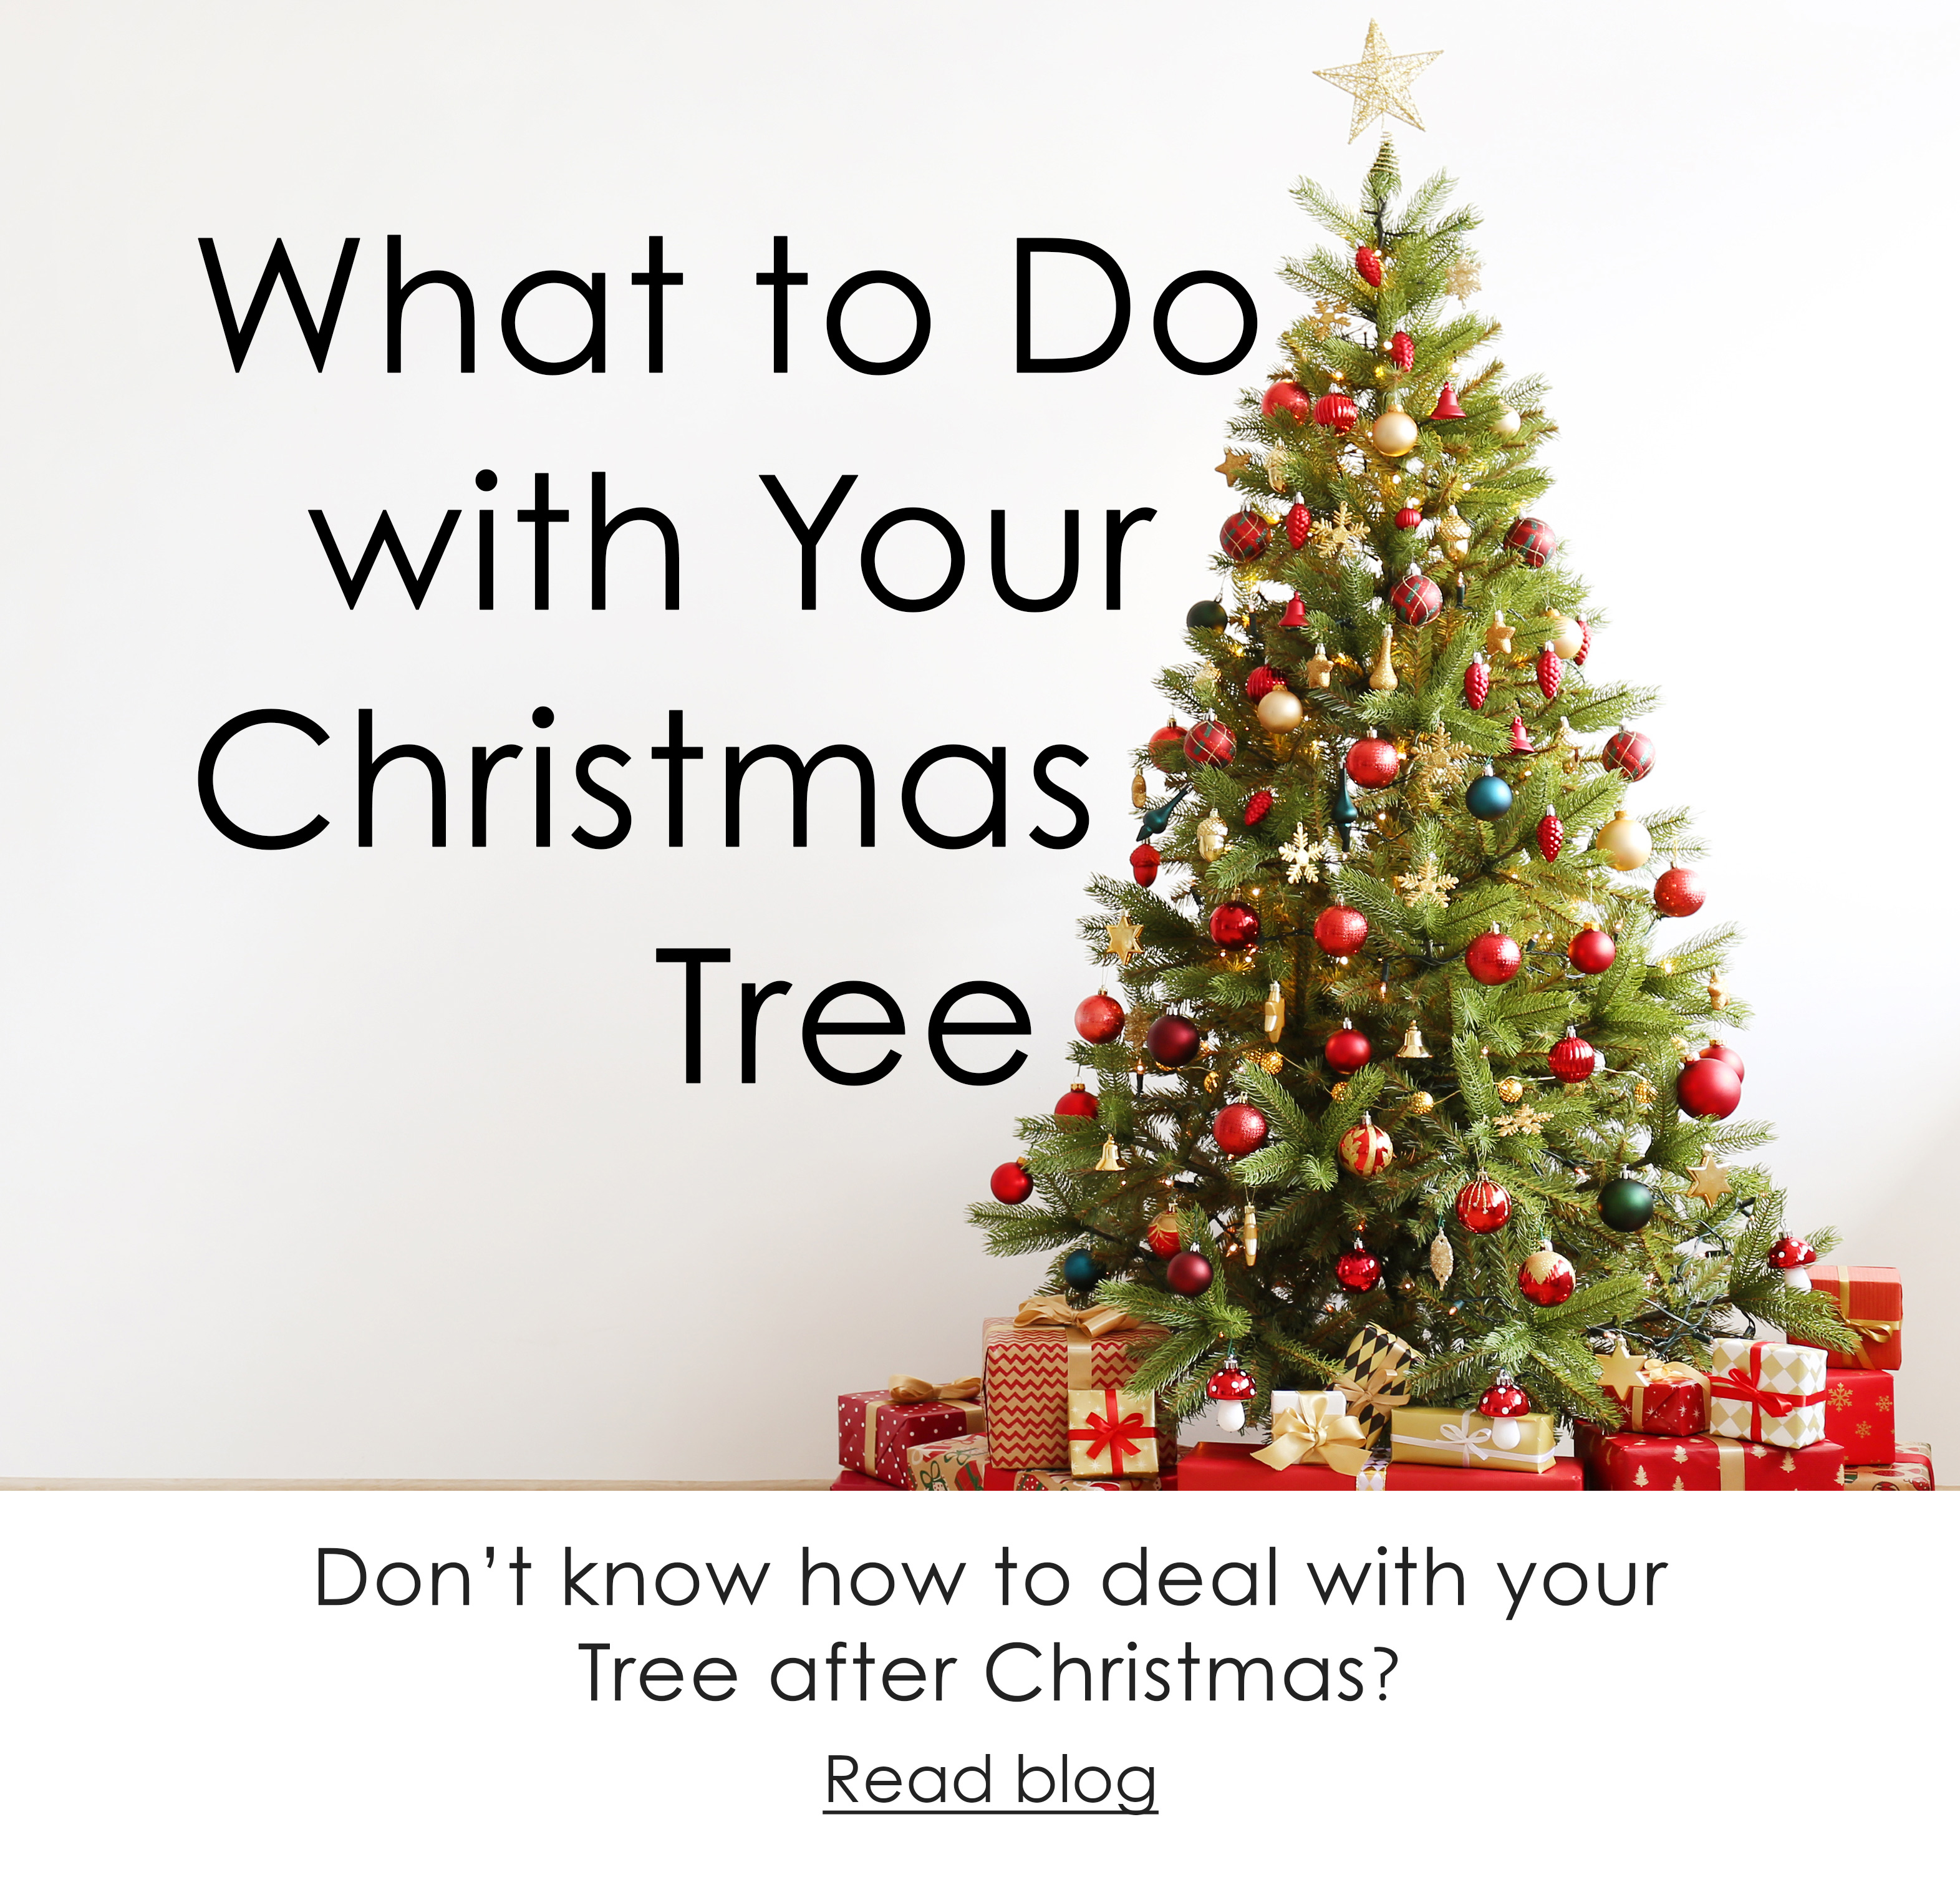 What to Do with Your Christmas Tree